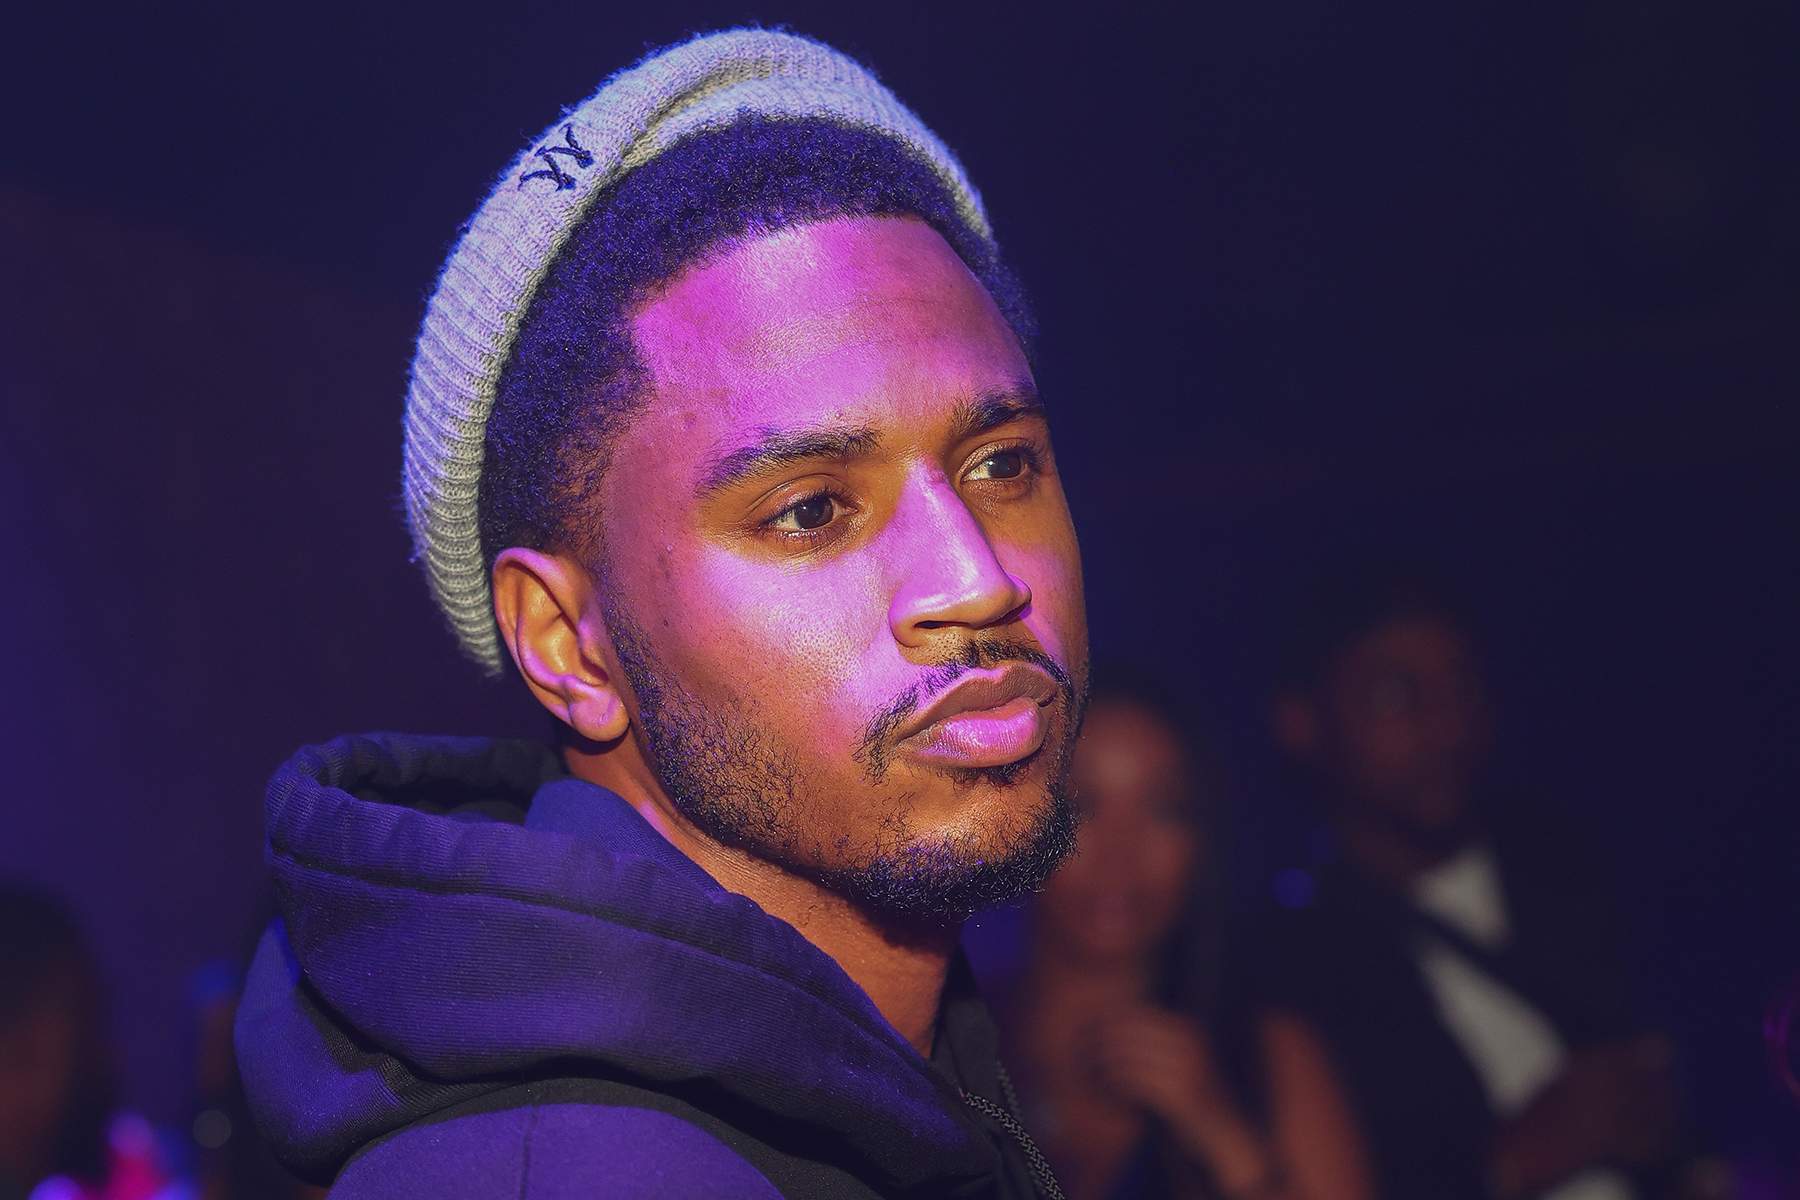 trey-songz-is-investigated-by-the-las-vegas-metropolitan-police-department-i